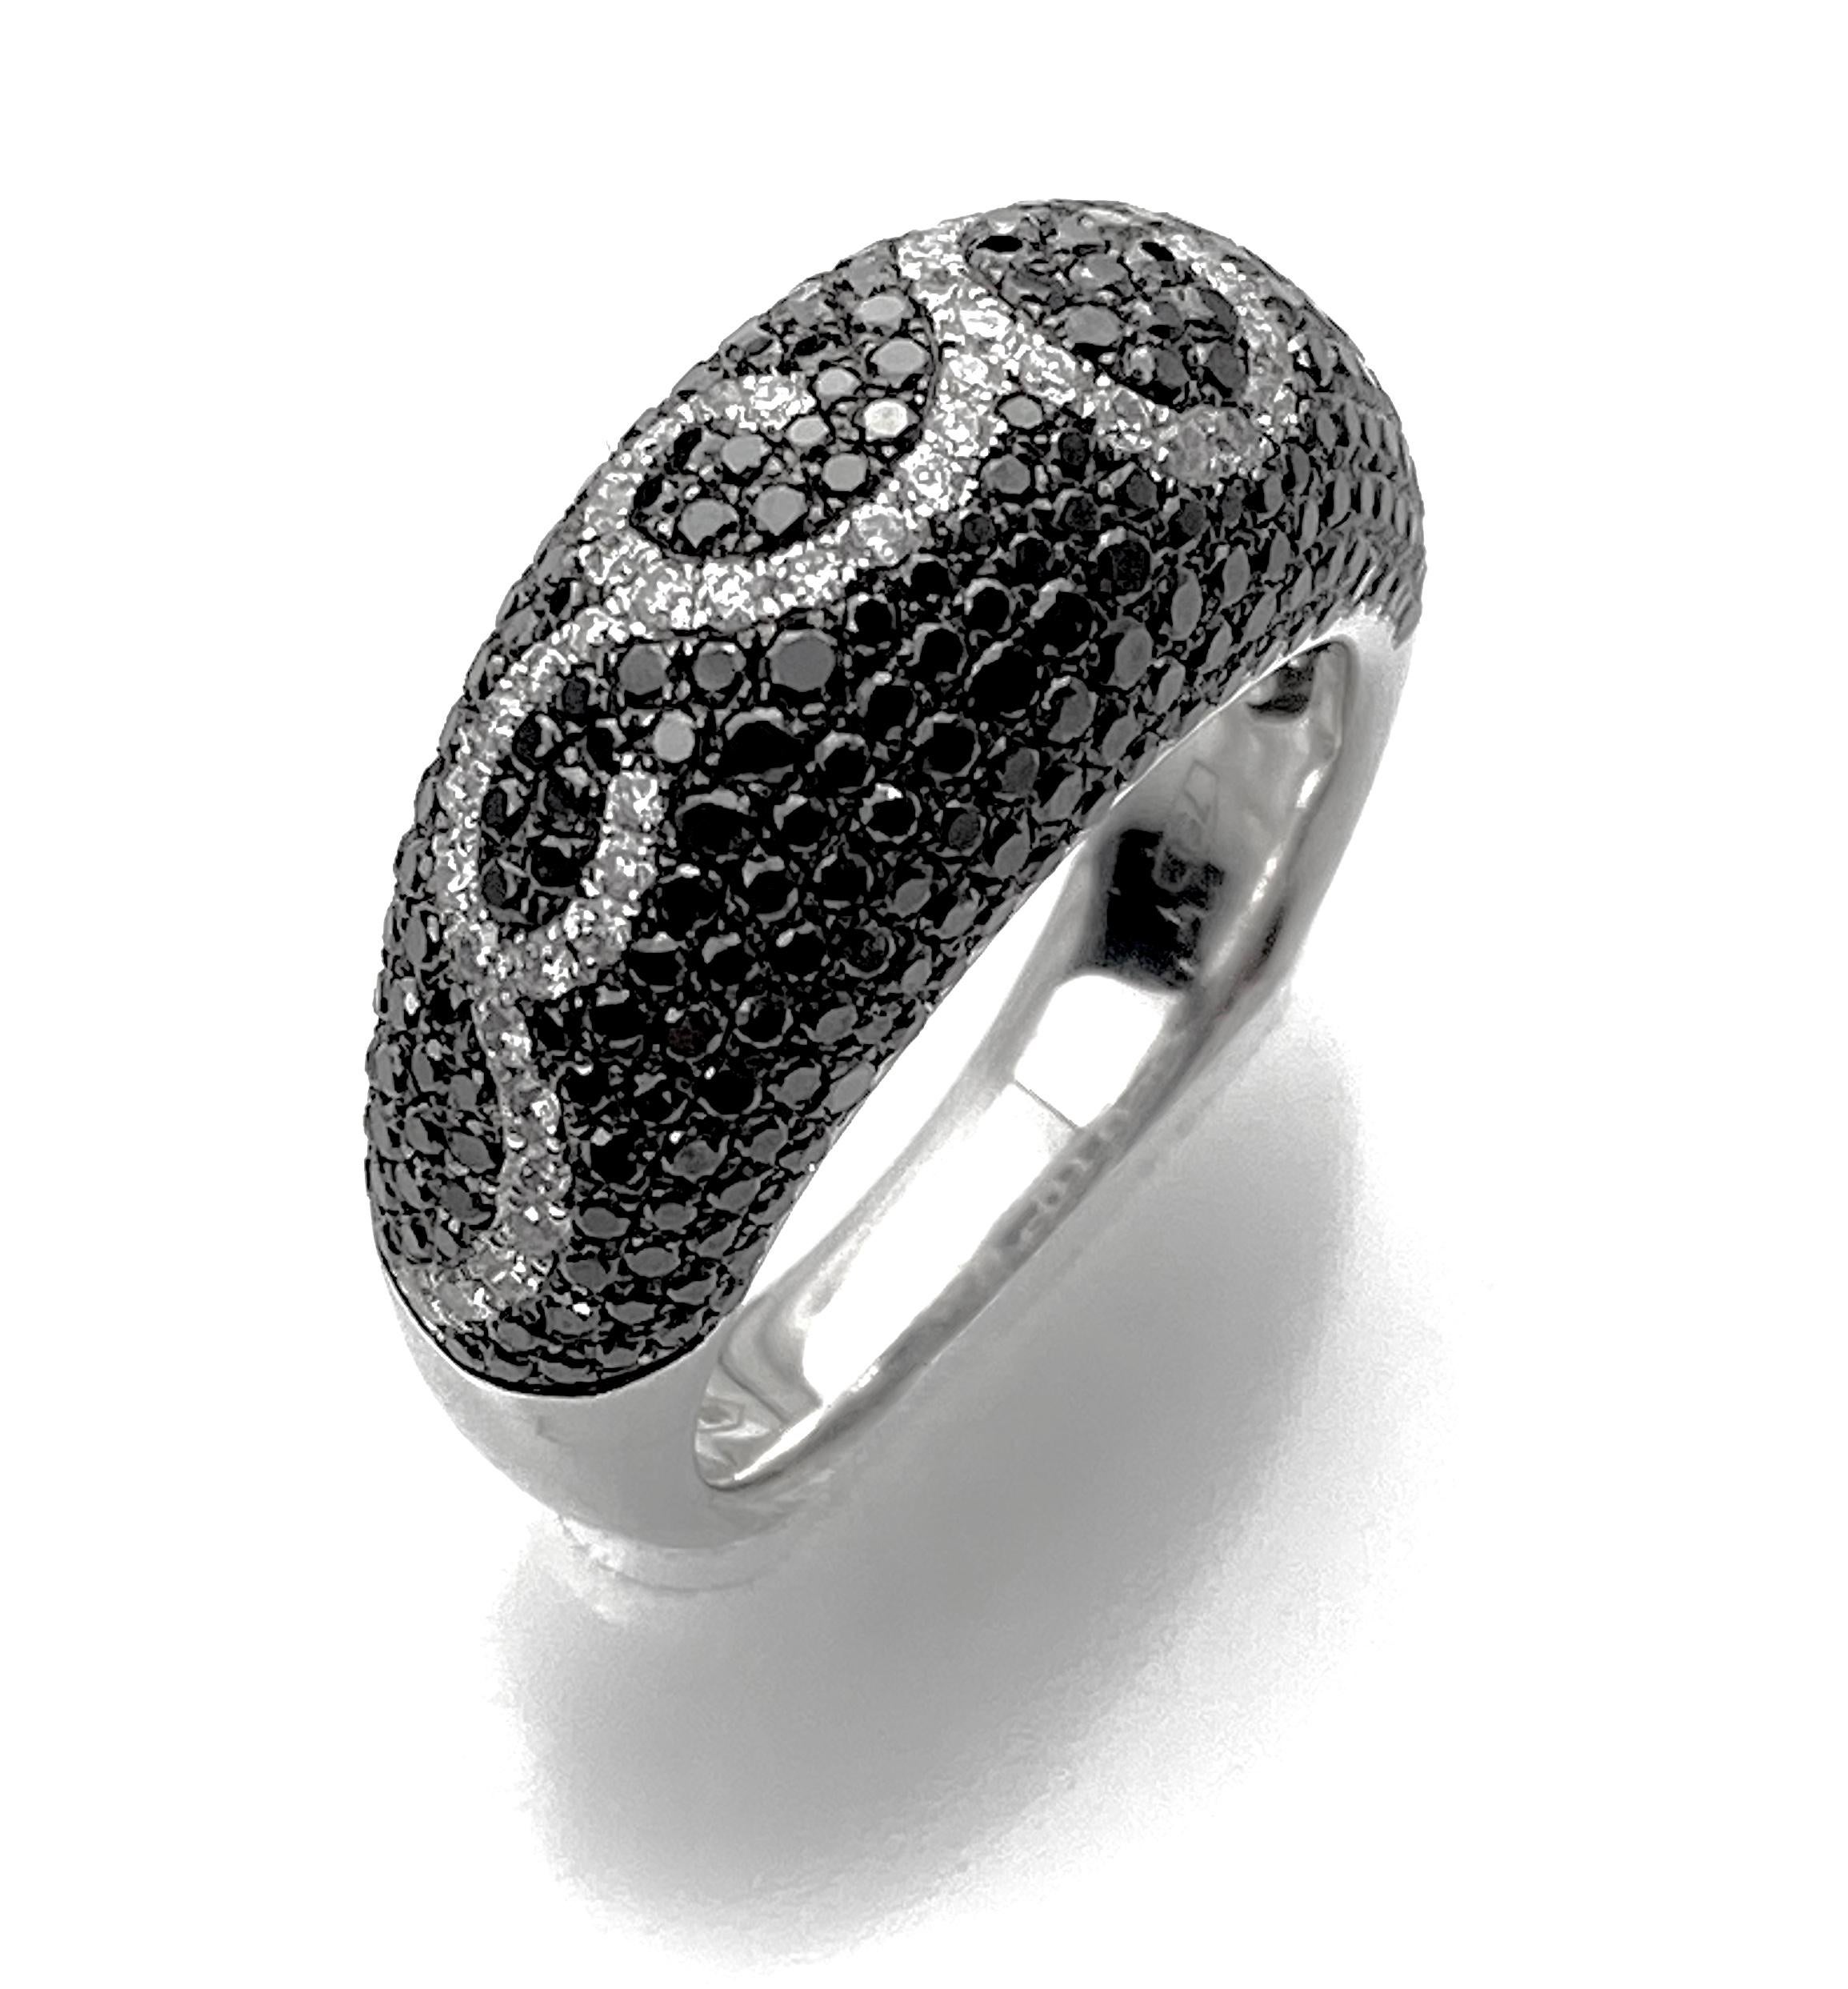 Black and white diamond swirl ring in 18kt white gold with 1.83ct total of pavé-set diamonds. Ring size 6 1/2. Resizing up or down 2 sizes included in the price.